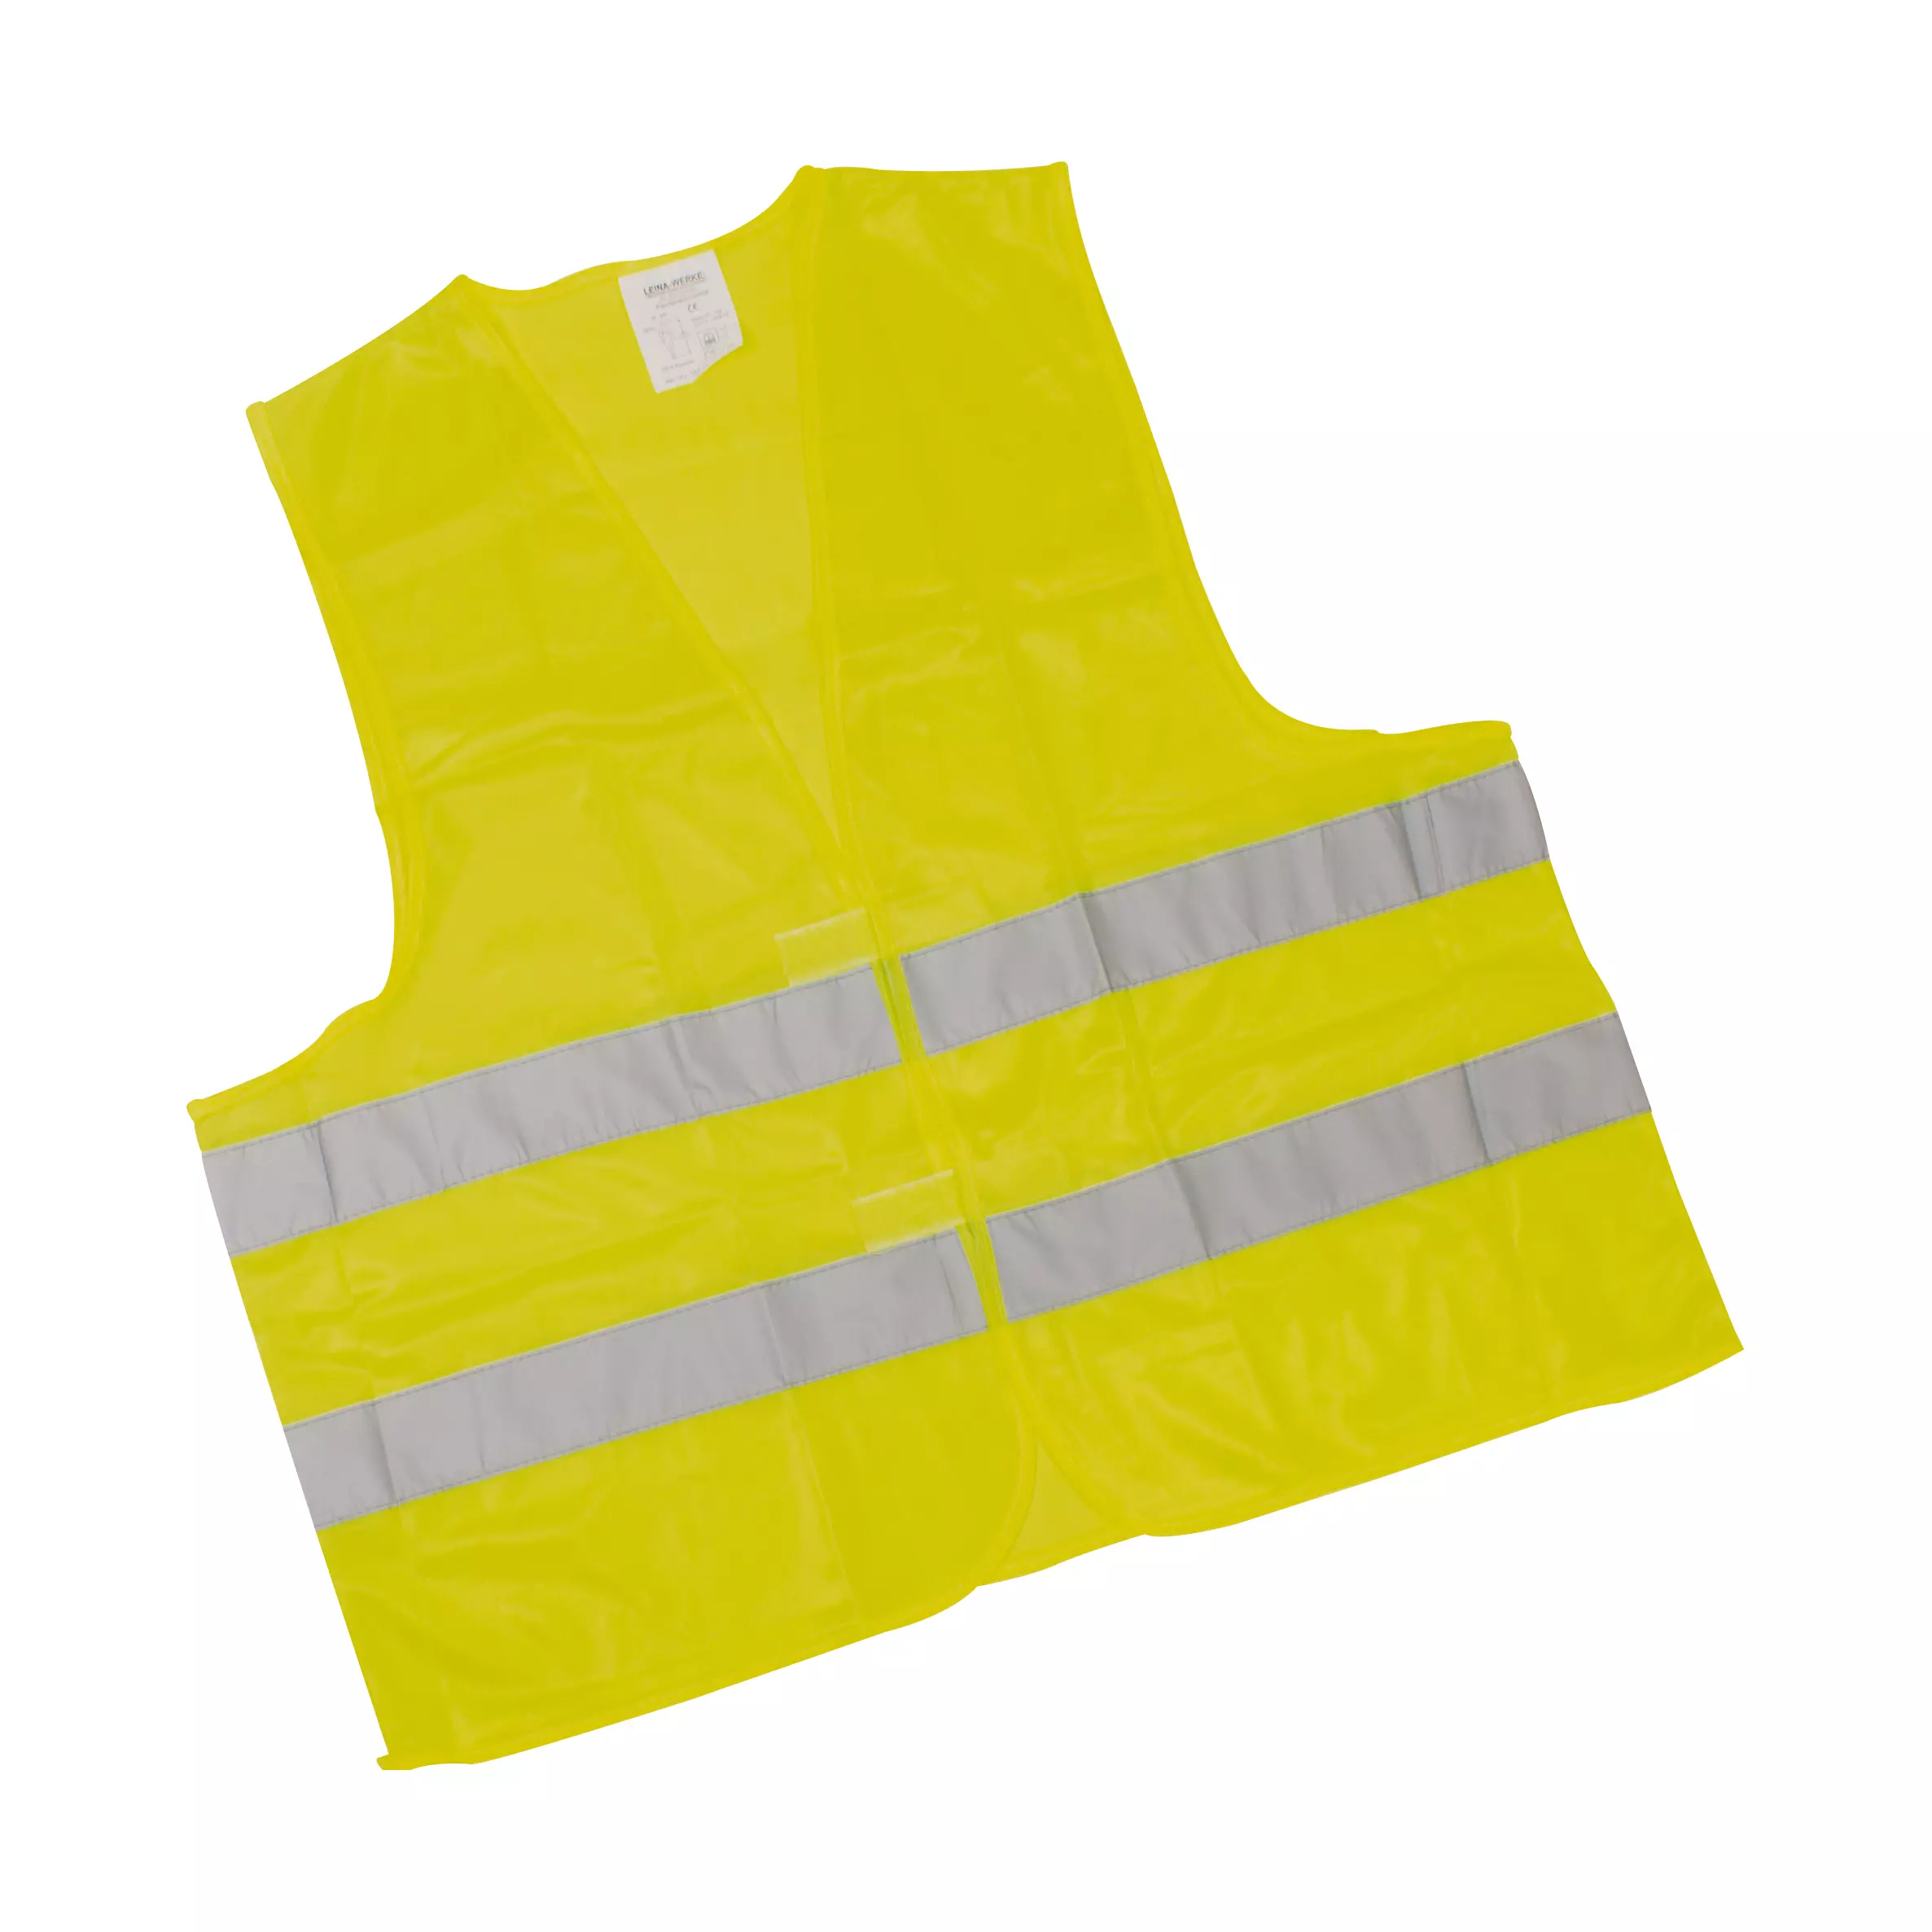 High visibility waistcoat according to DIN EN ISO 20471:2013 / Class 1